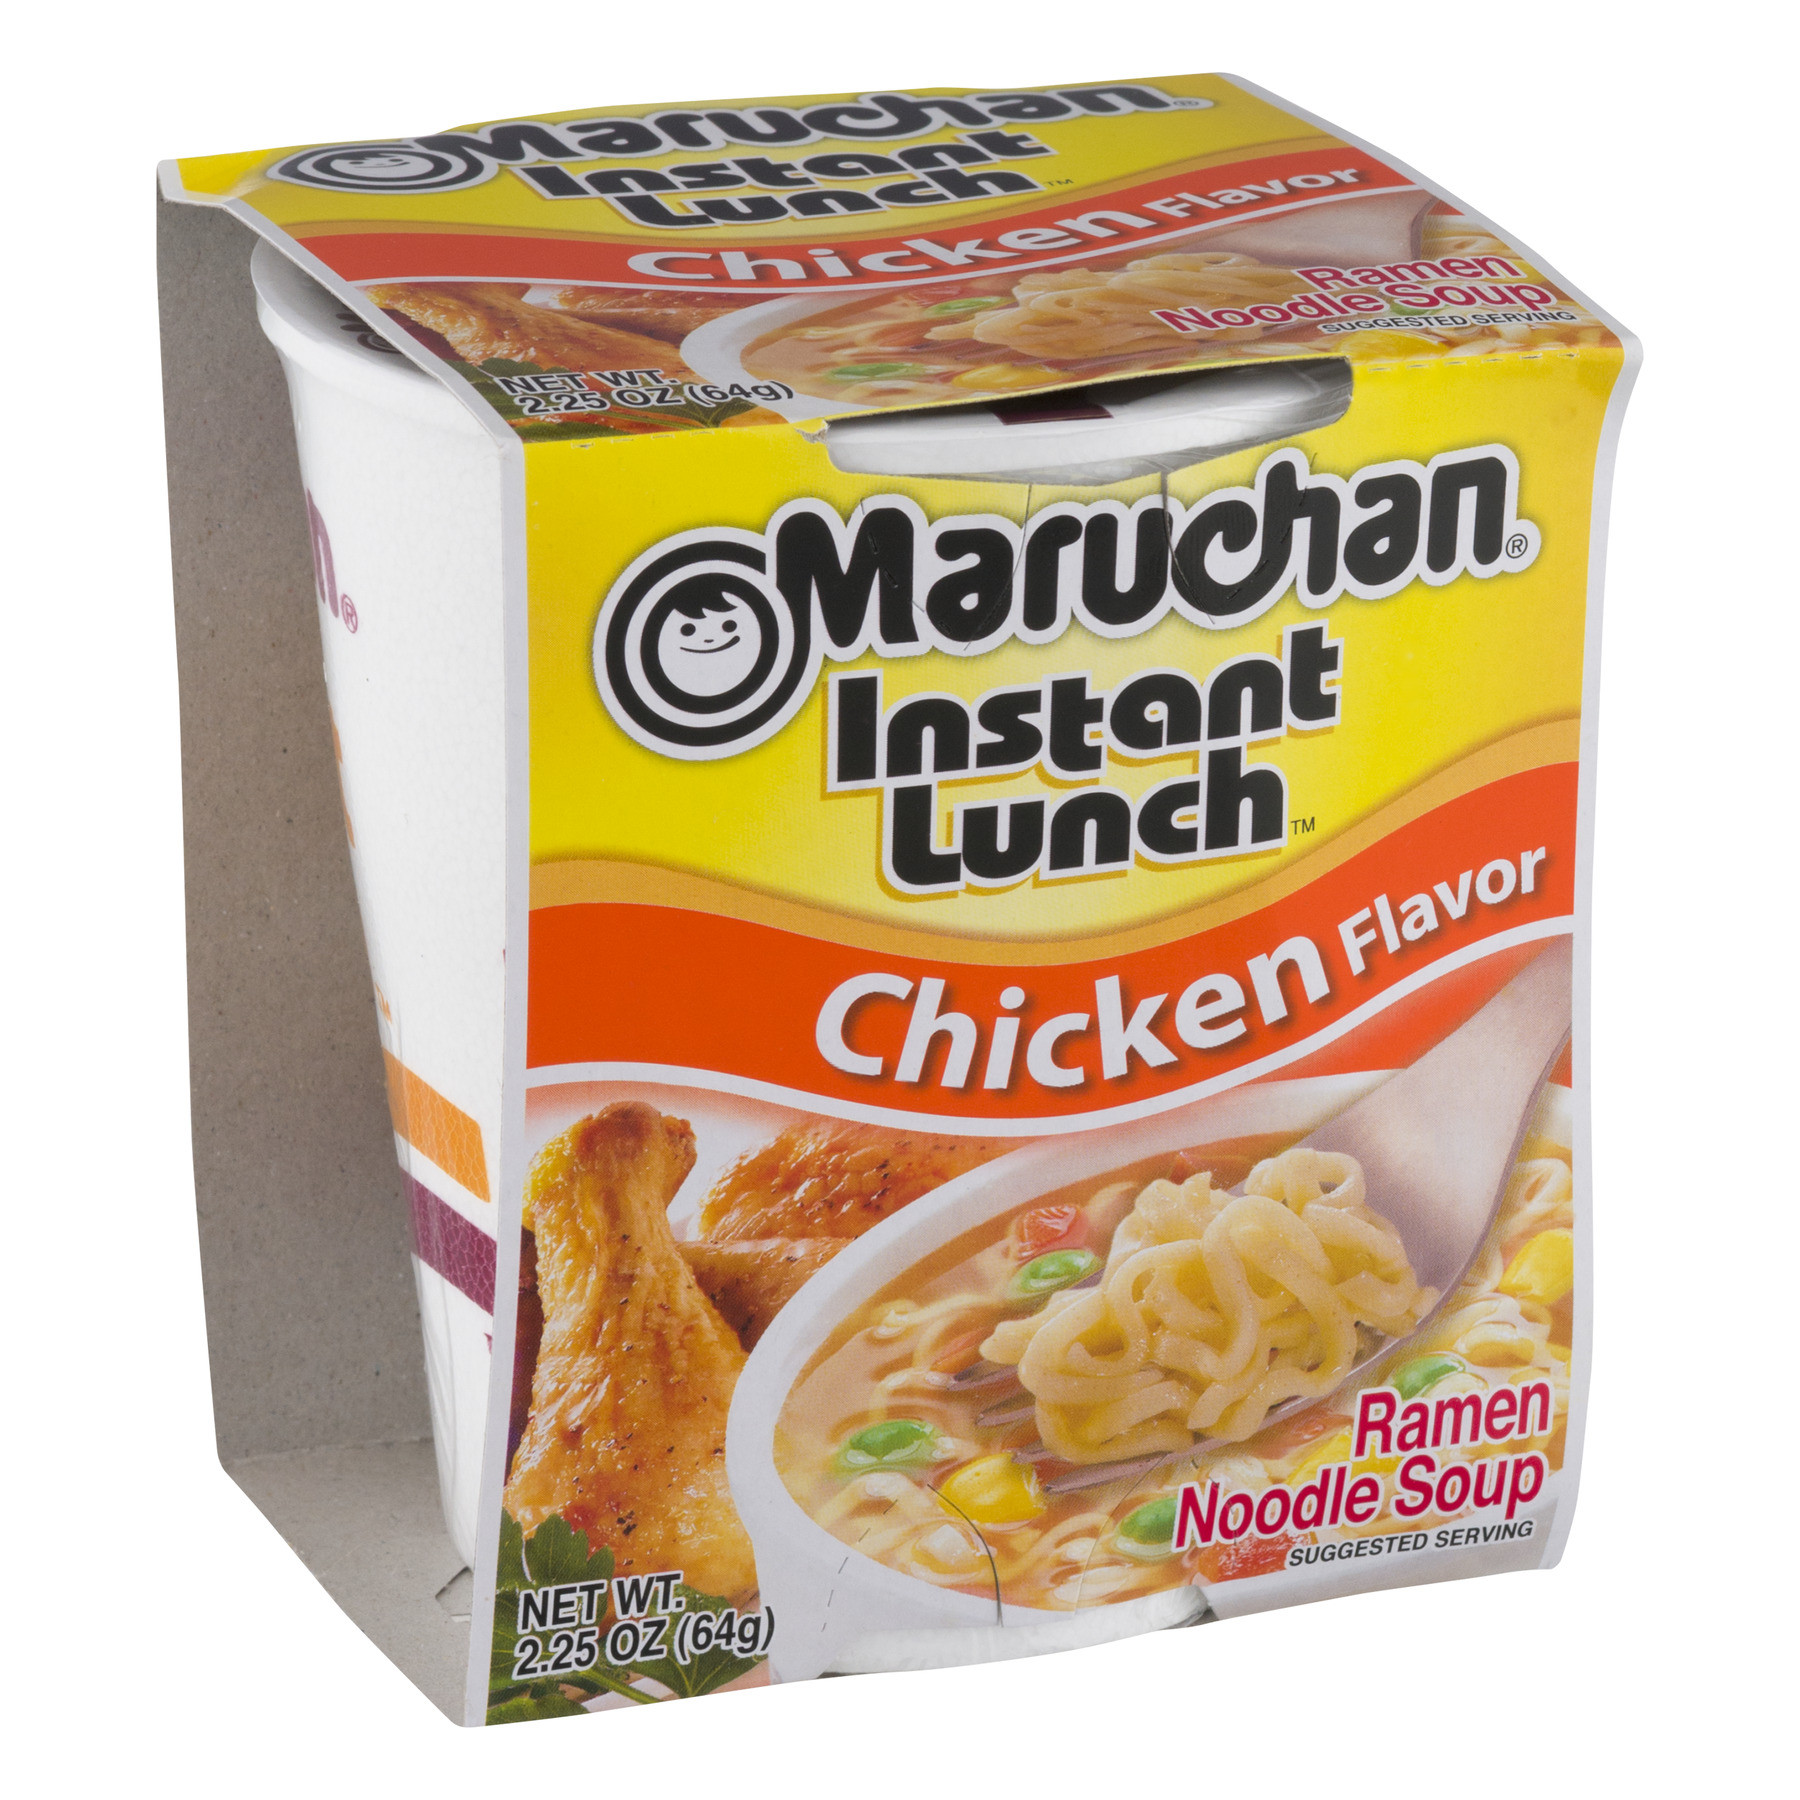 Microwave Cup Of Noodles
 can you microwave maruchan instant lunch